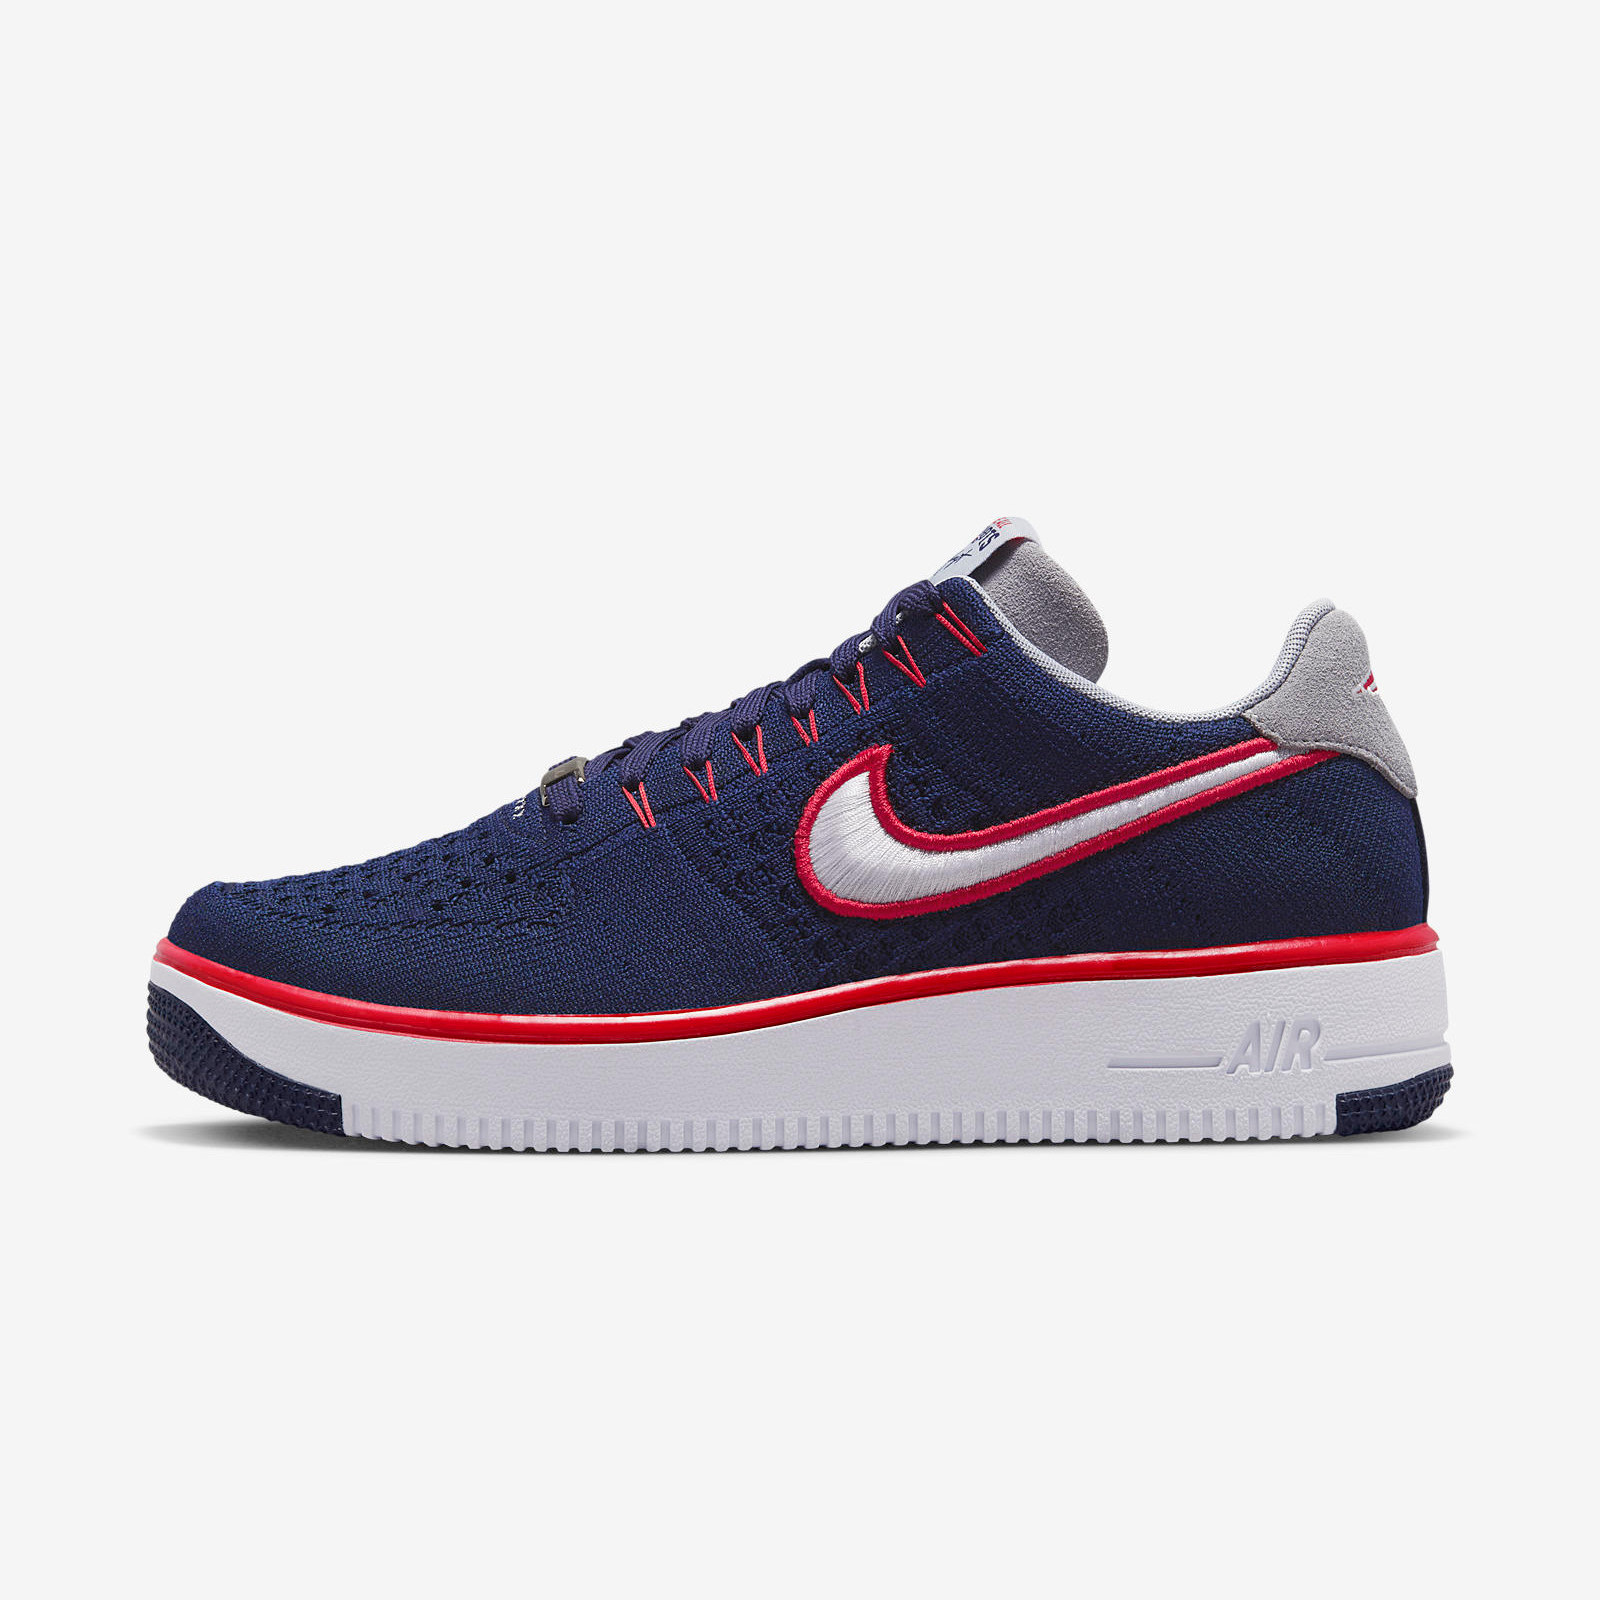 Nike Air Force 1
Ultra Flyknit Low
Navy / Red